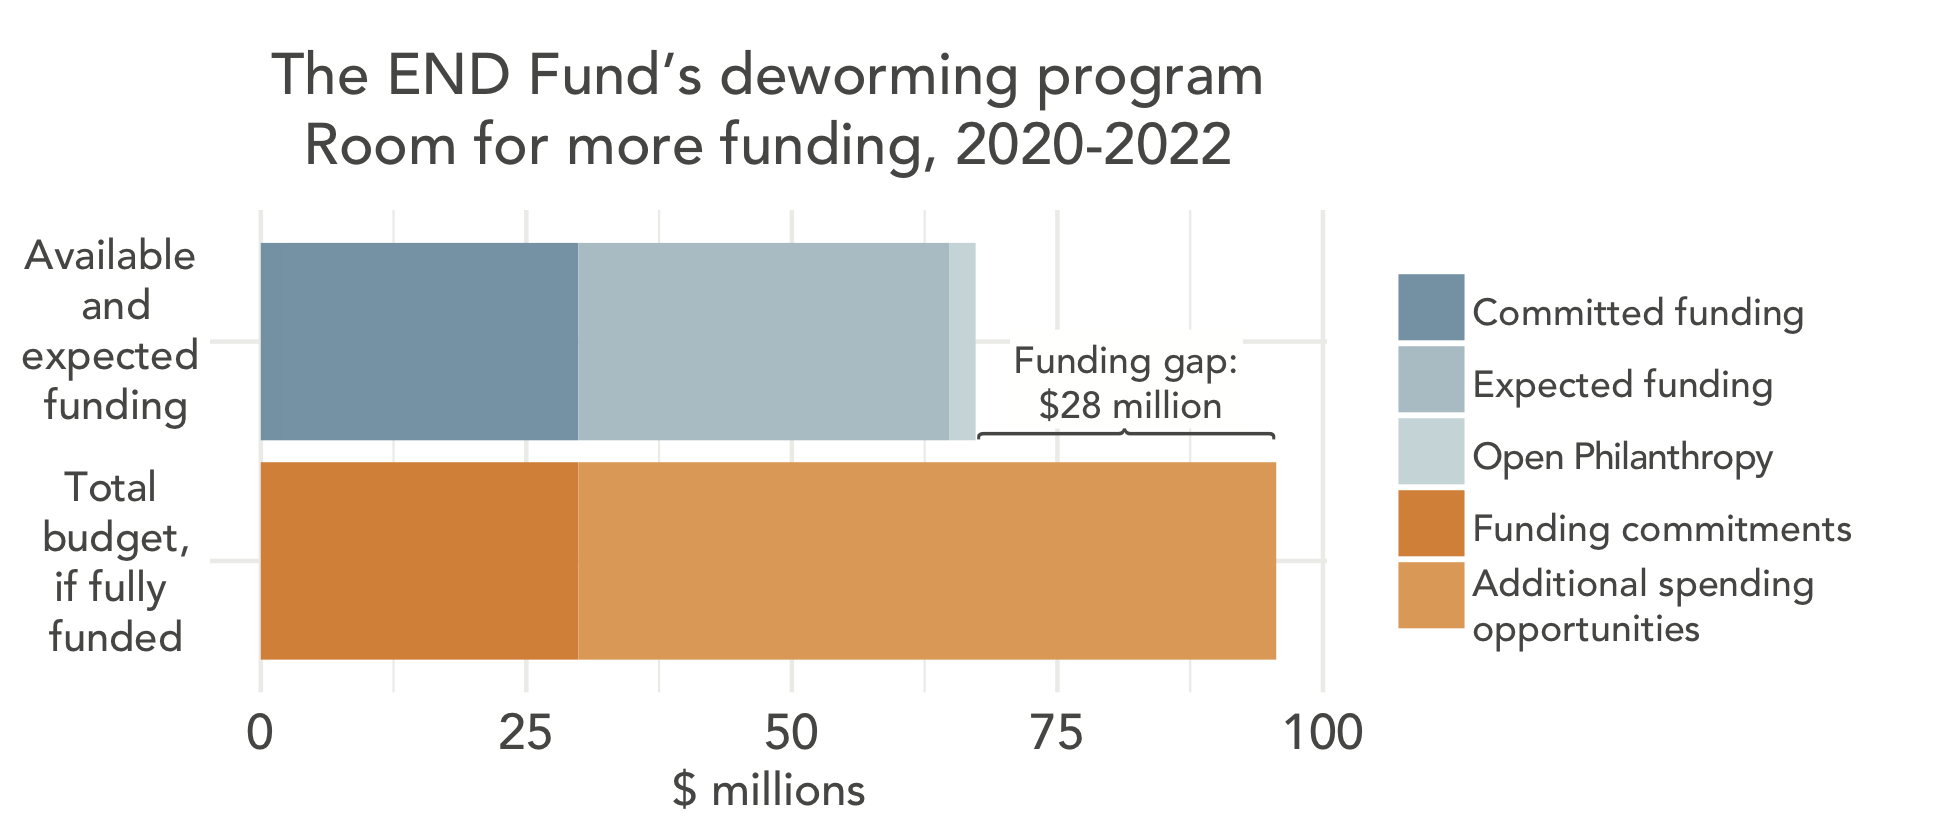 Room for more funding for The END Fund for deworming 2020-2022